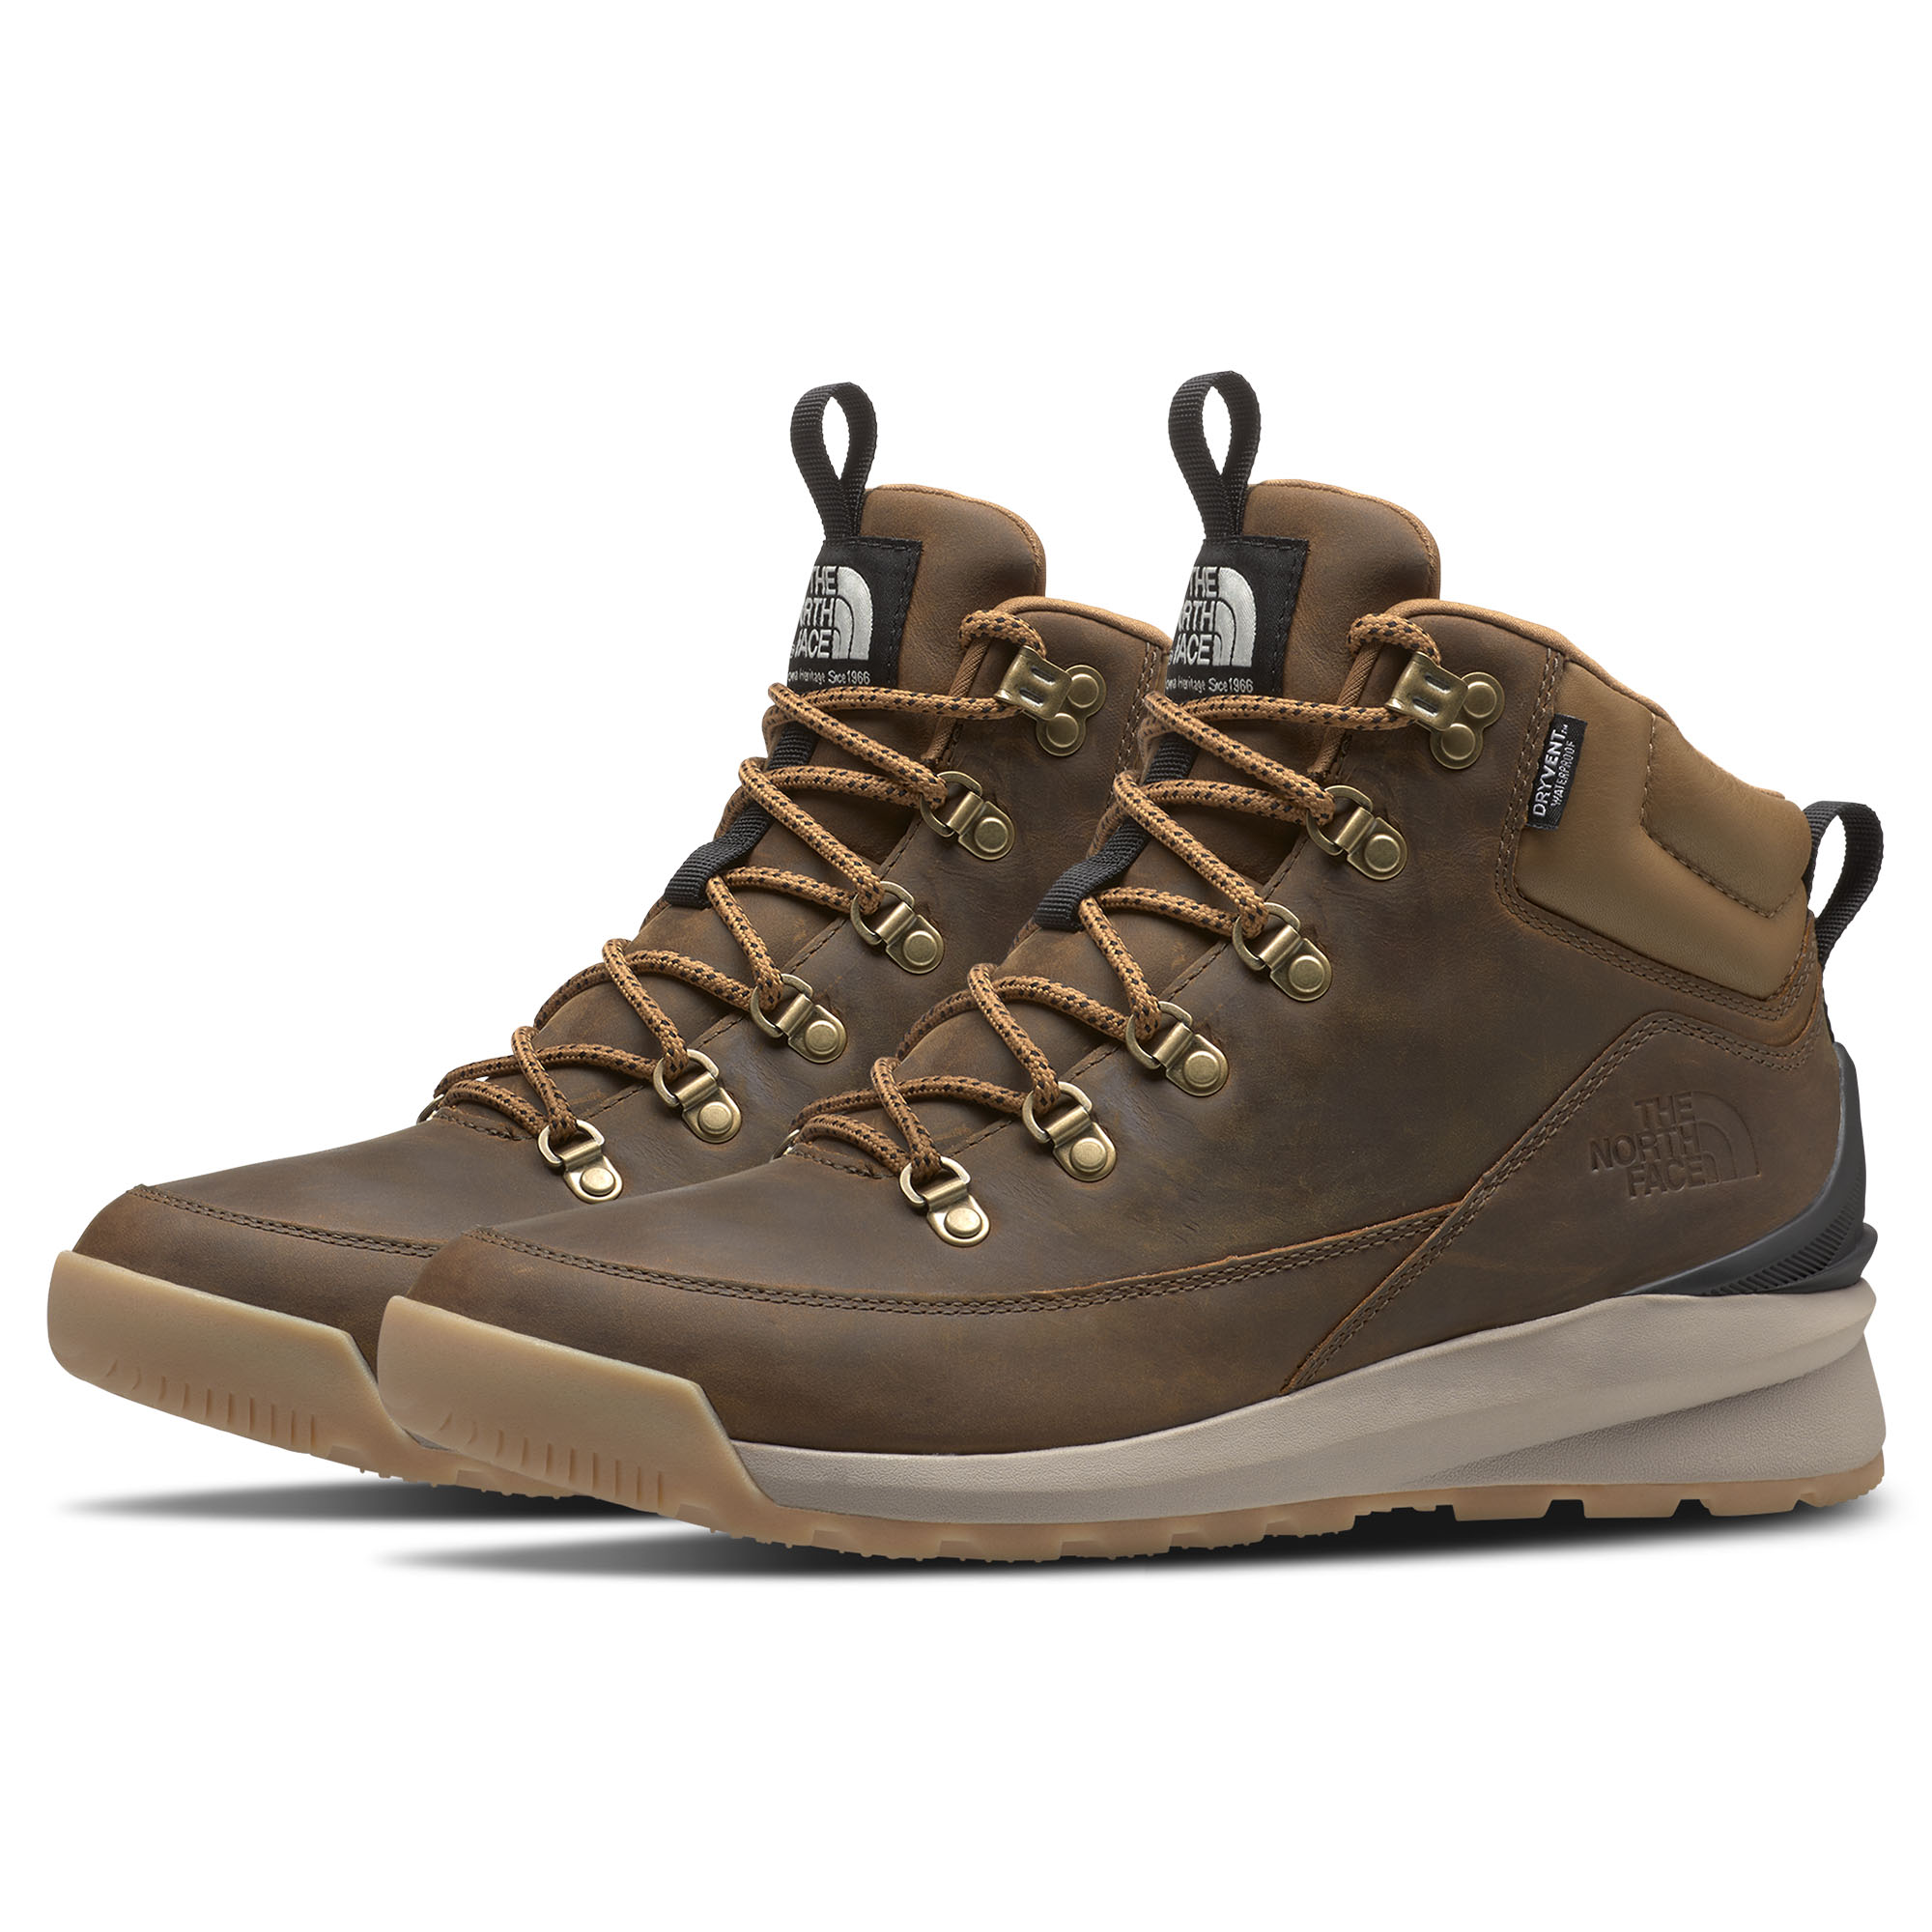 the north face mens hiking boots